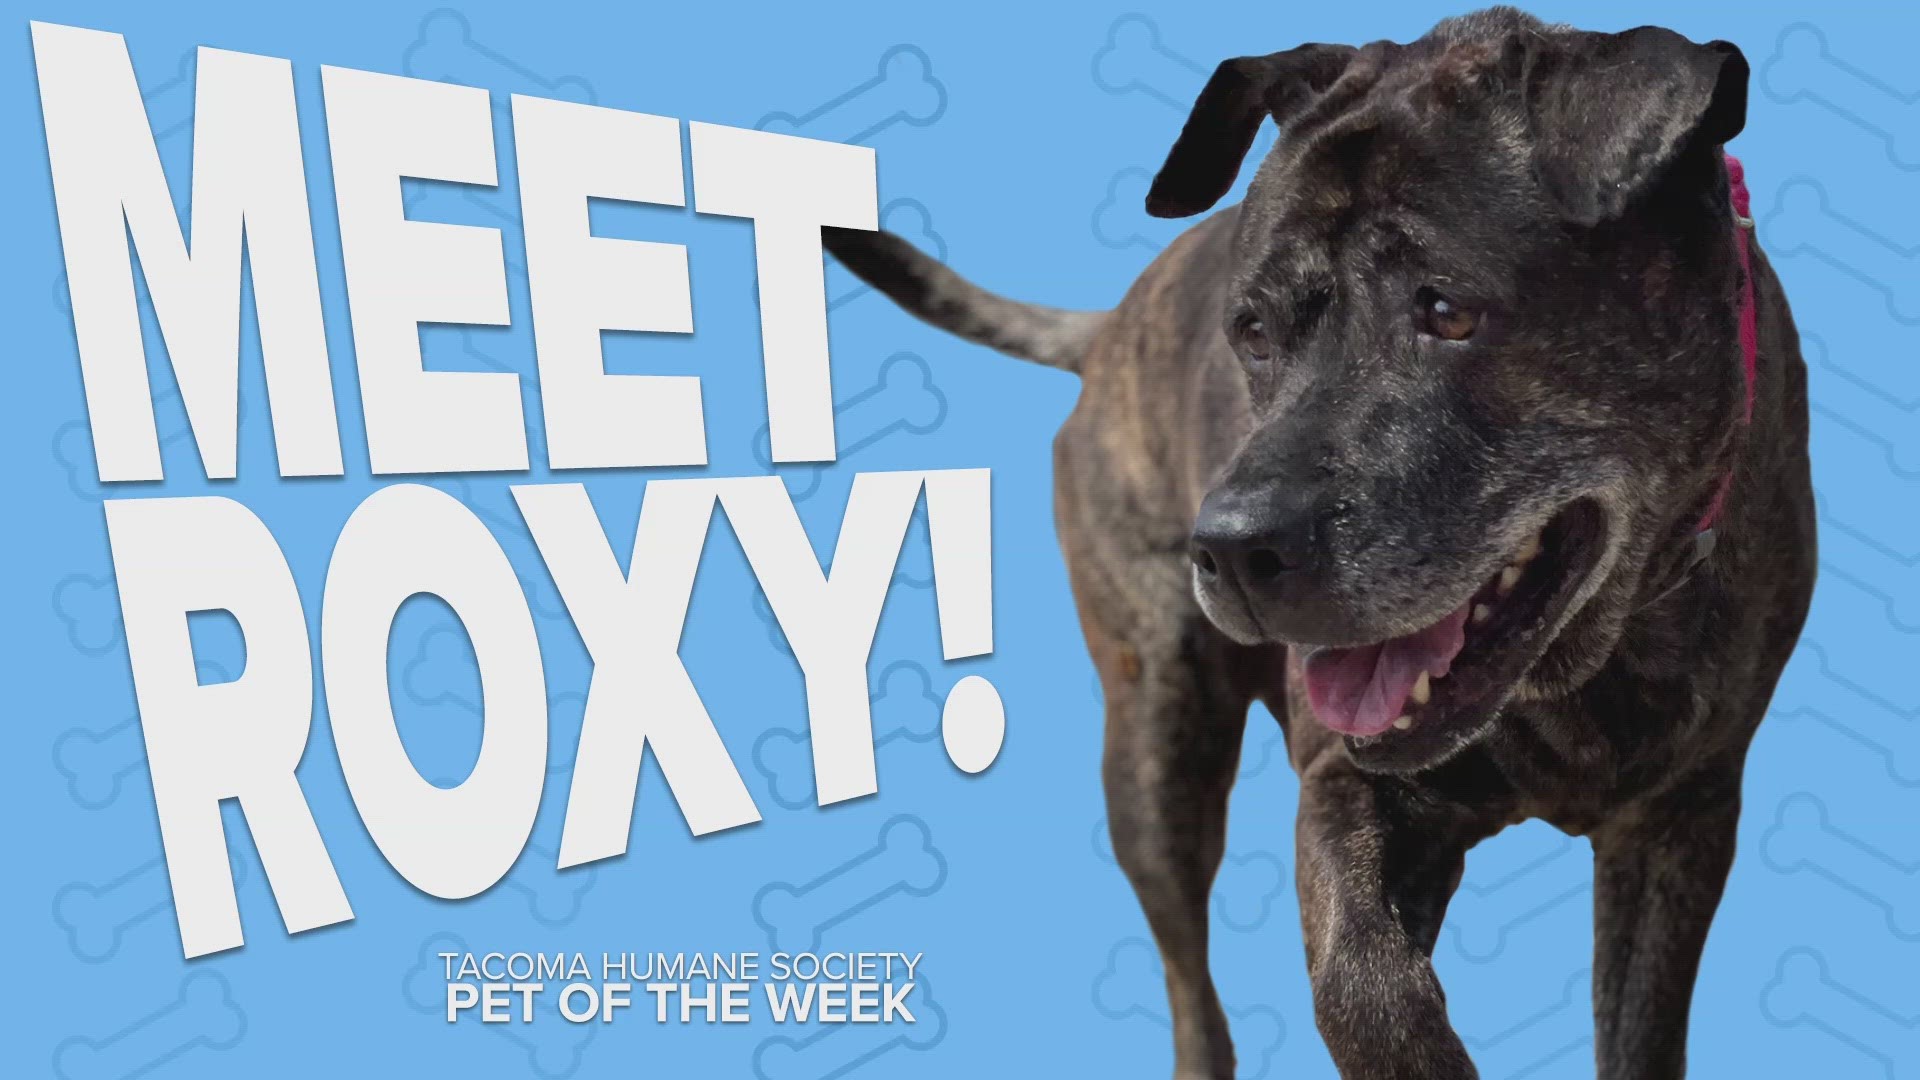 The adoptable pet of the week is Roxy!